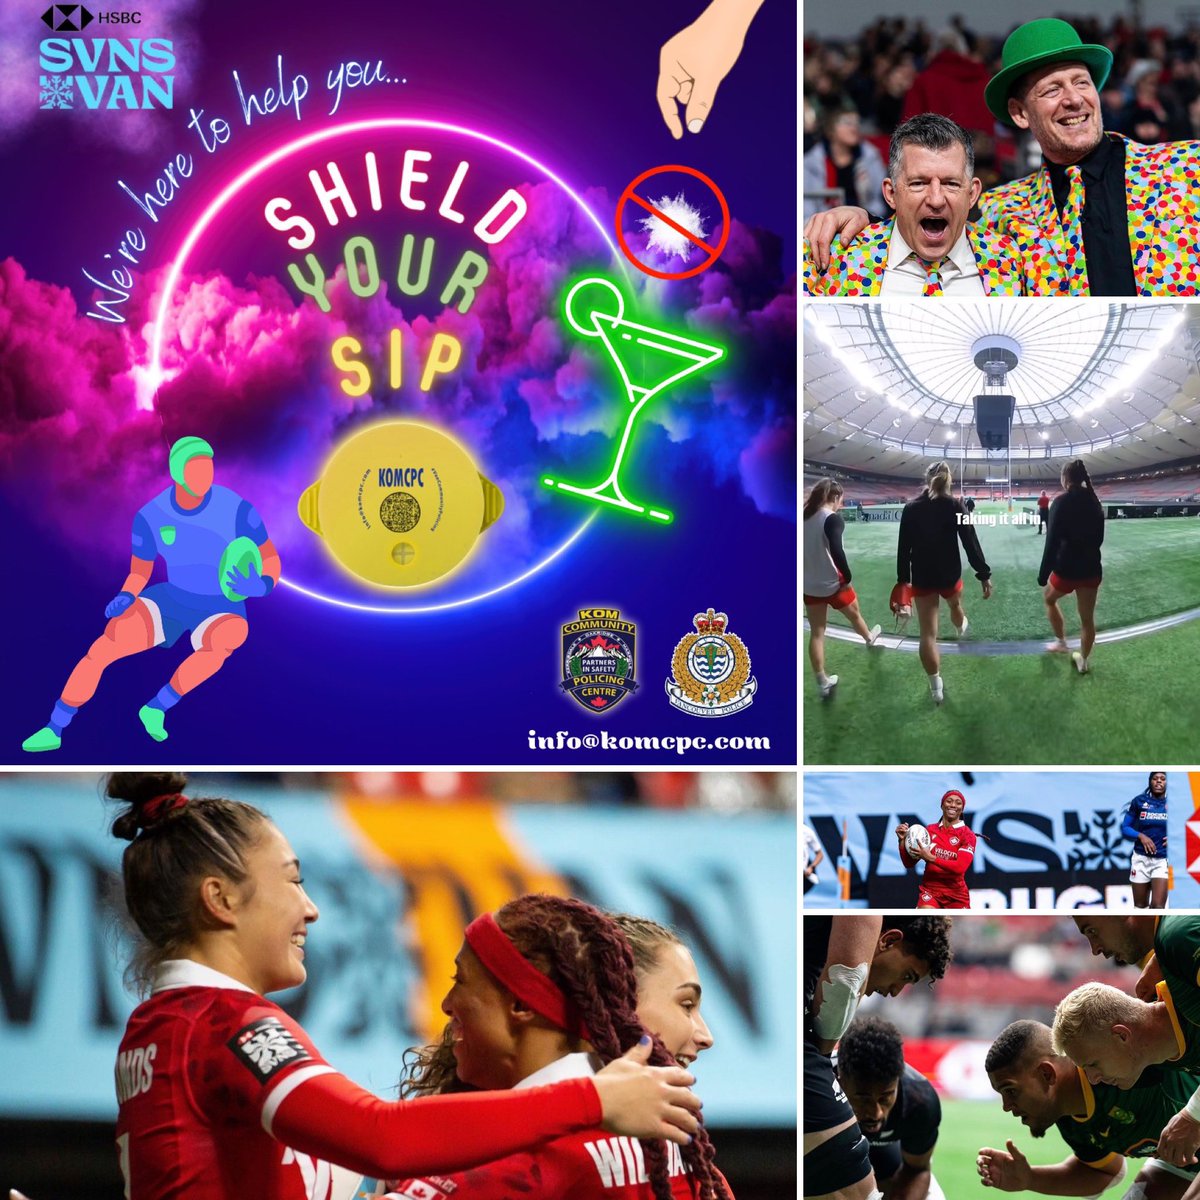 #VanRugby7s we will see you soon! 🫶🏻🍸🍹✅

Helping you to #StaySafe we will be distributing #FREE #DrinkShields in @bcplacestadium on #Level200! #Safeguarding you from the possibility of #DrinkSpiking. 🏉🍾🥃💚

#VanCommunityPolice #safetymeasures #ShieldYourSip #BCPlace #KOMCPC